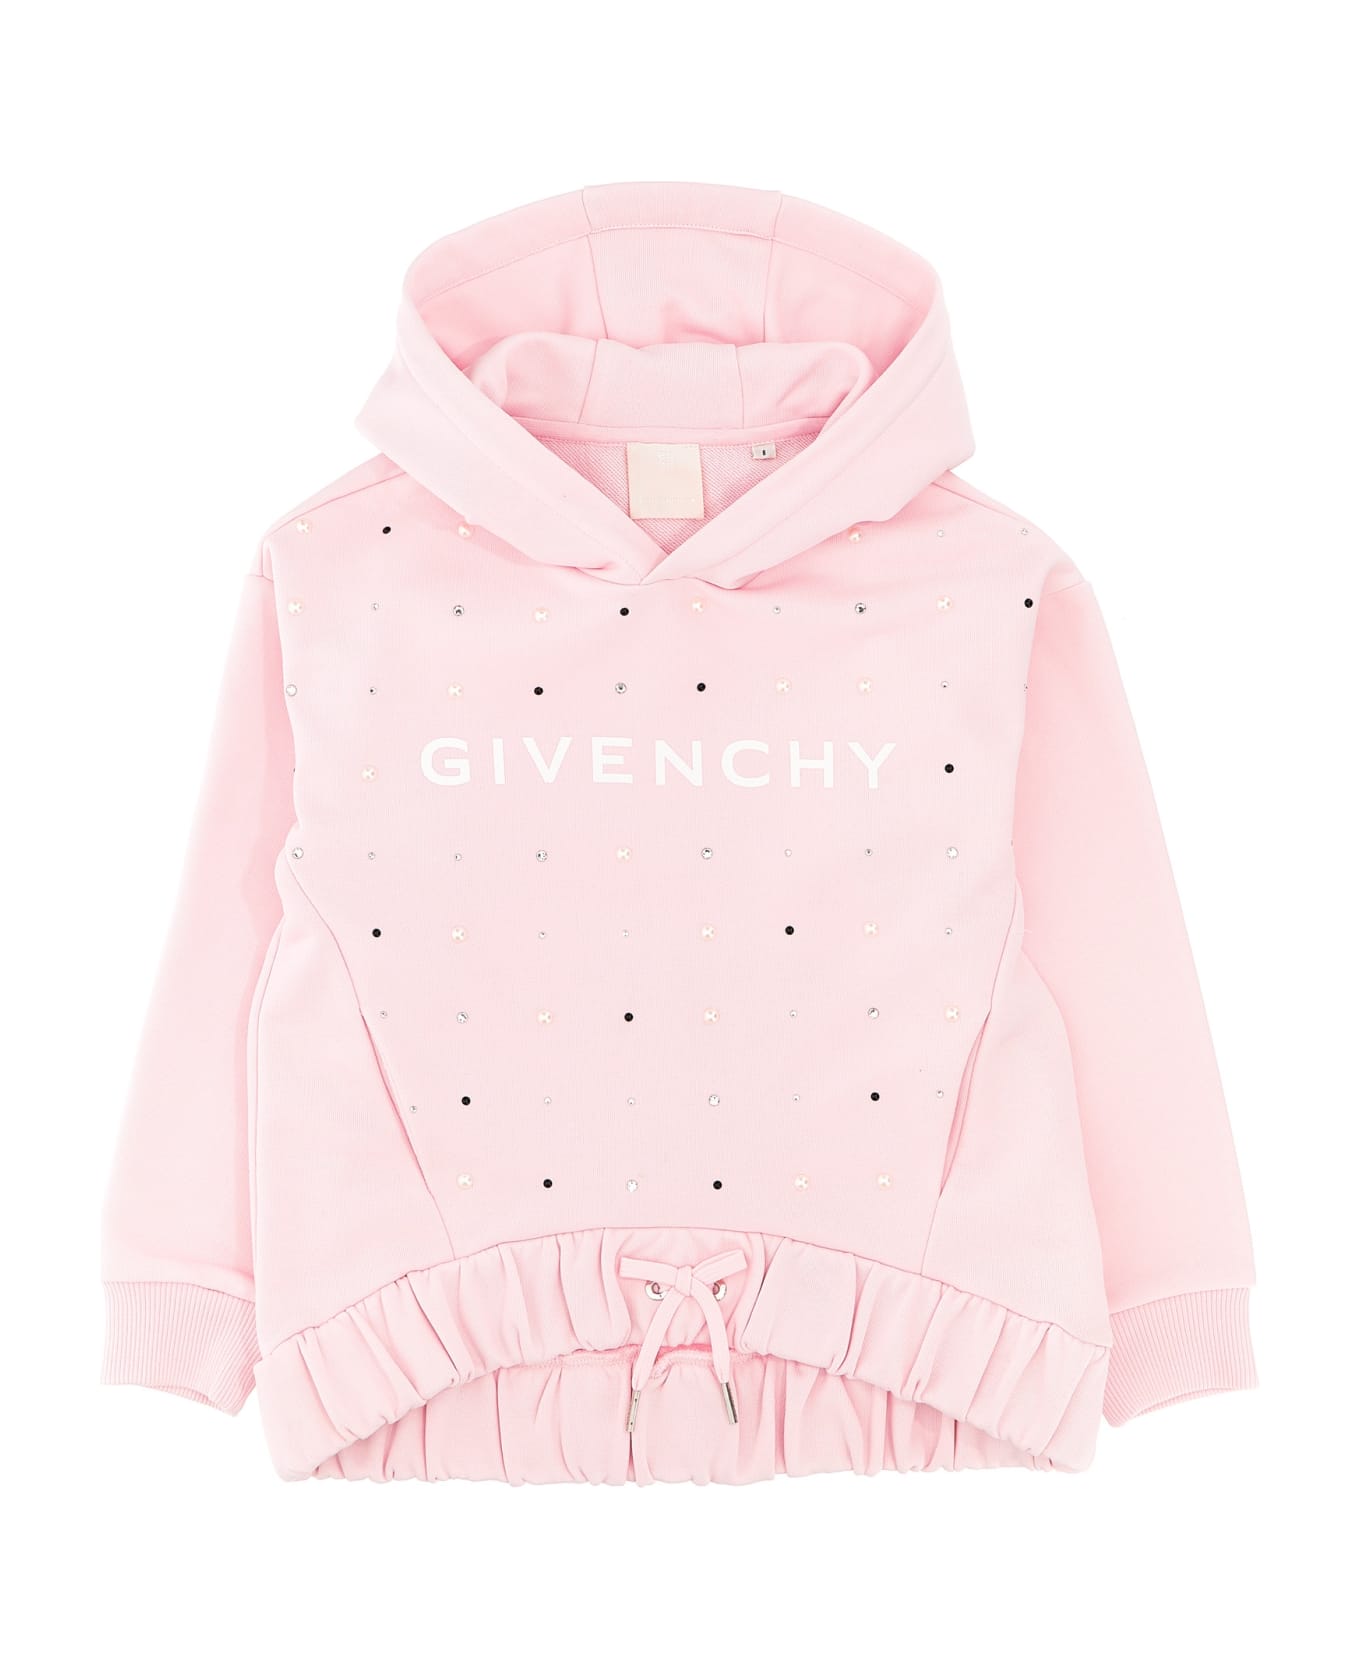 Givenchy Logo Hoodie - Pink